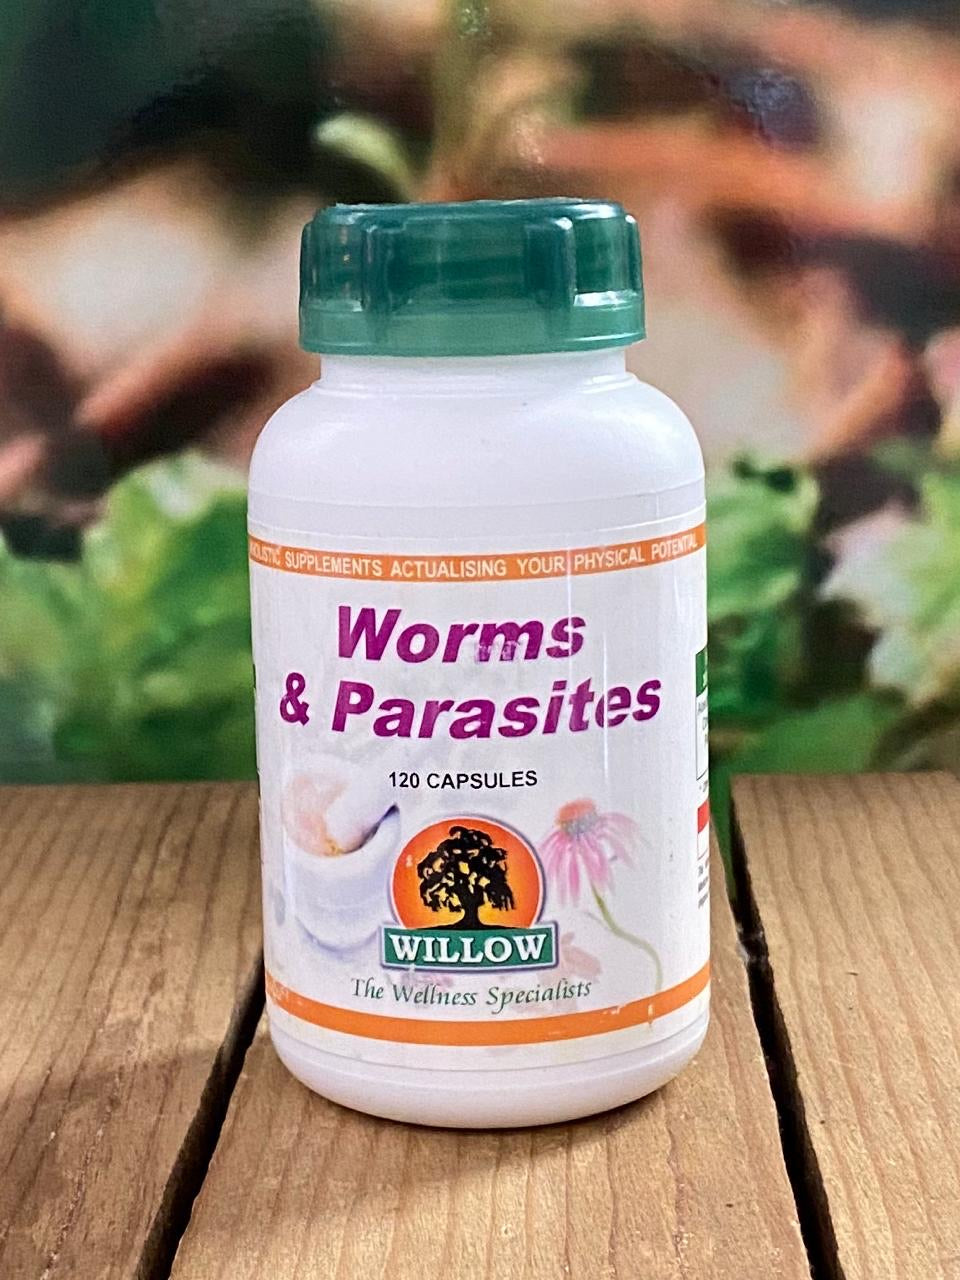 Willow Worms & Parasites 120 capsules